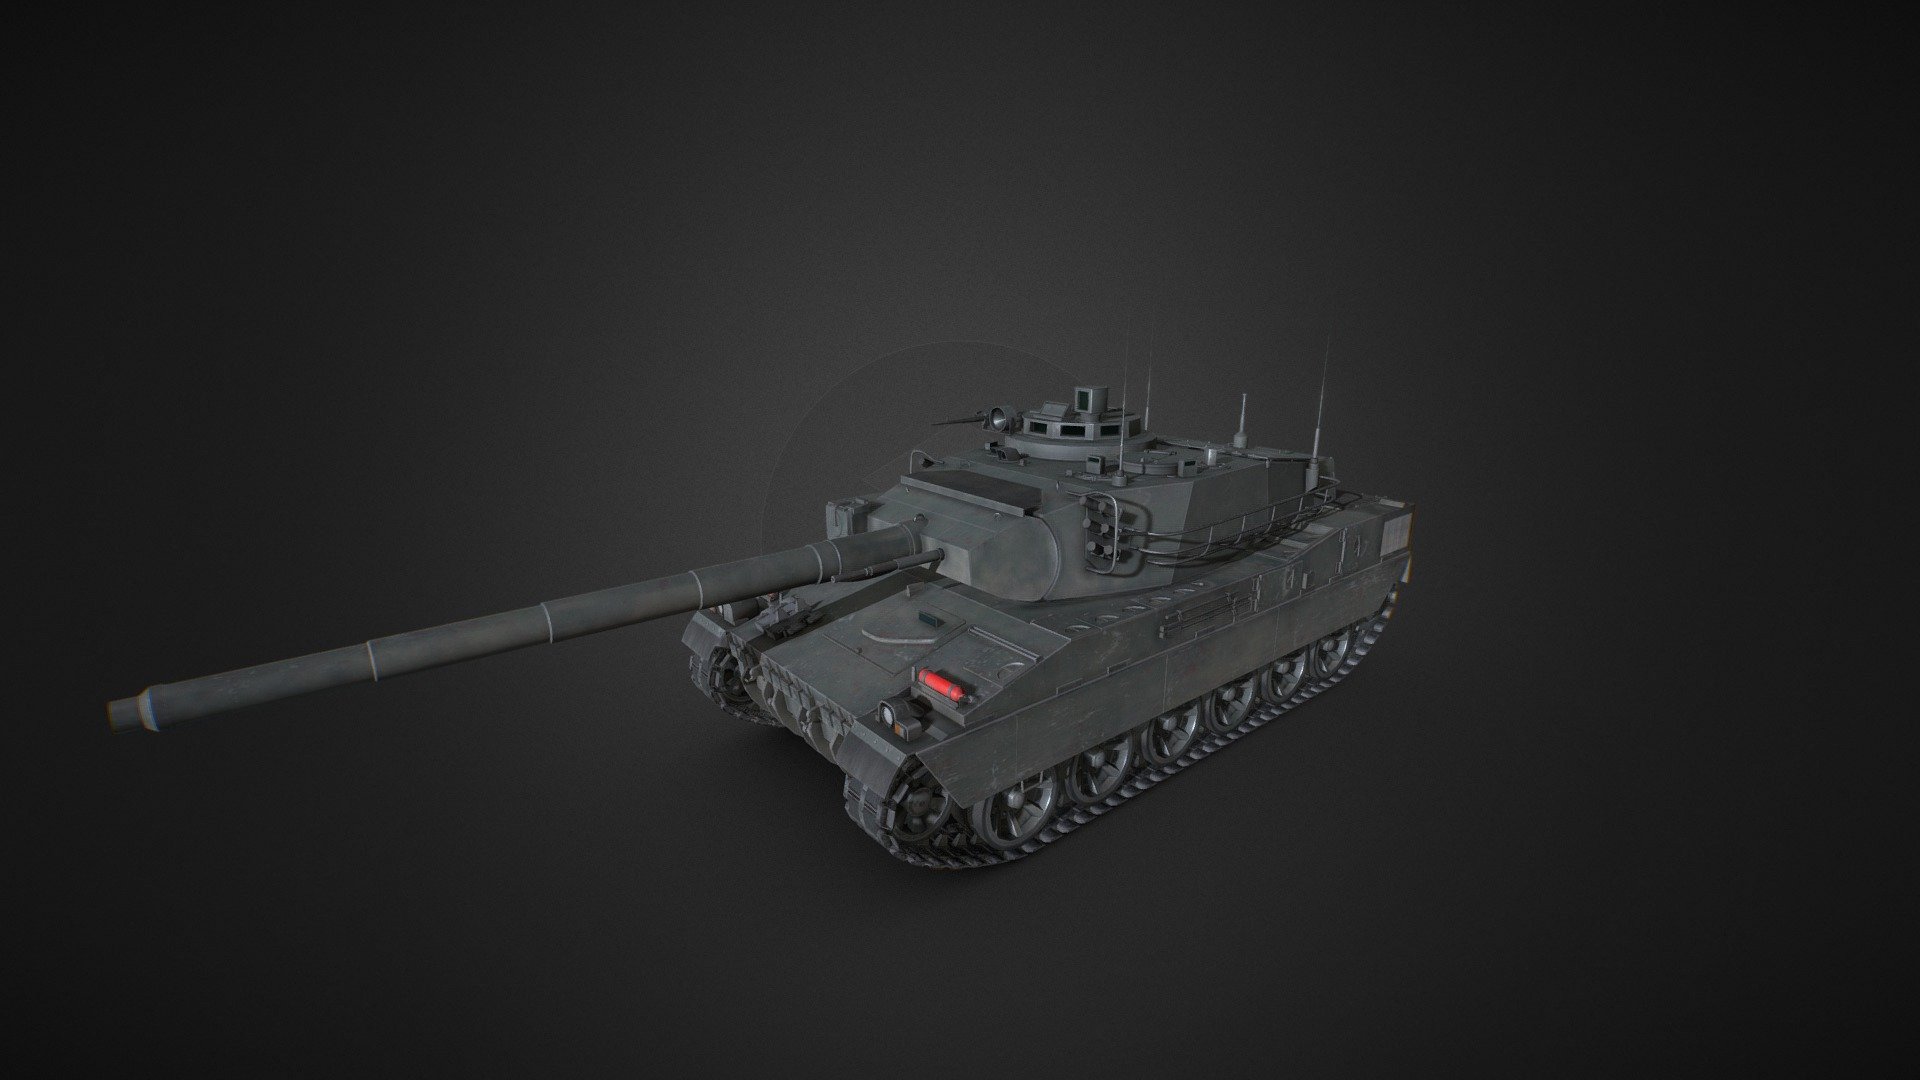 https://www.artstation.com/thefalkonett

Texture resolution was halved for better online viewing.

A model of an AMX-40, made for an assignment in university.
Tri-Count: ~45k without tracks, ~70k with tracks.
Textures: Each of the tank's modules has it's own texture-set. The overall texel-density is equal on all pieces, and the UVs are laid out in such a way, that a tiling camo-pattern is not being obstructed too heavily. The texture-sets also include a camo/colour-mask to allow for an easy application of camouflage.

Blender was used for the modelling, Marmoset Toolbag for baking, and Substance Painter for texturing 3d model